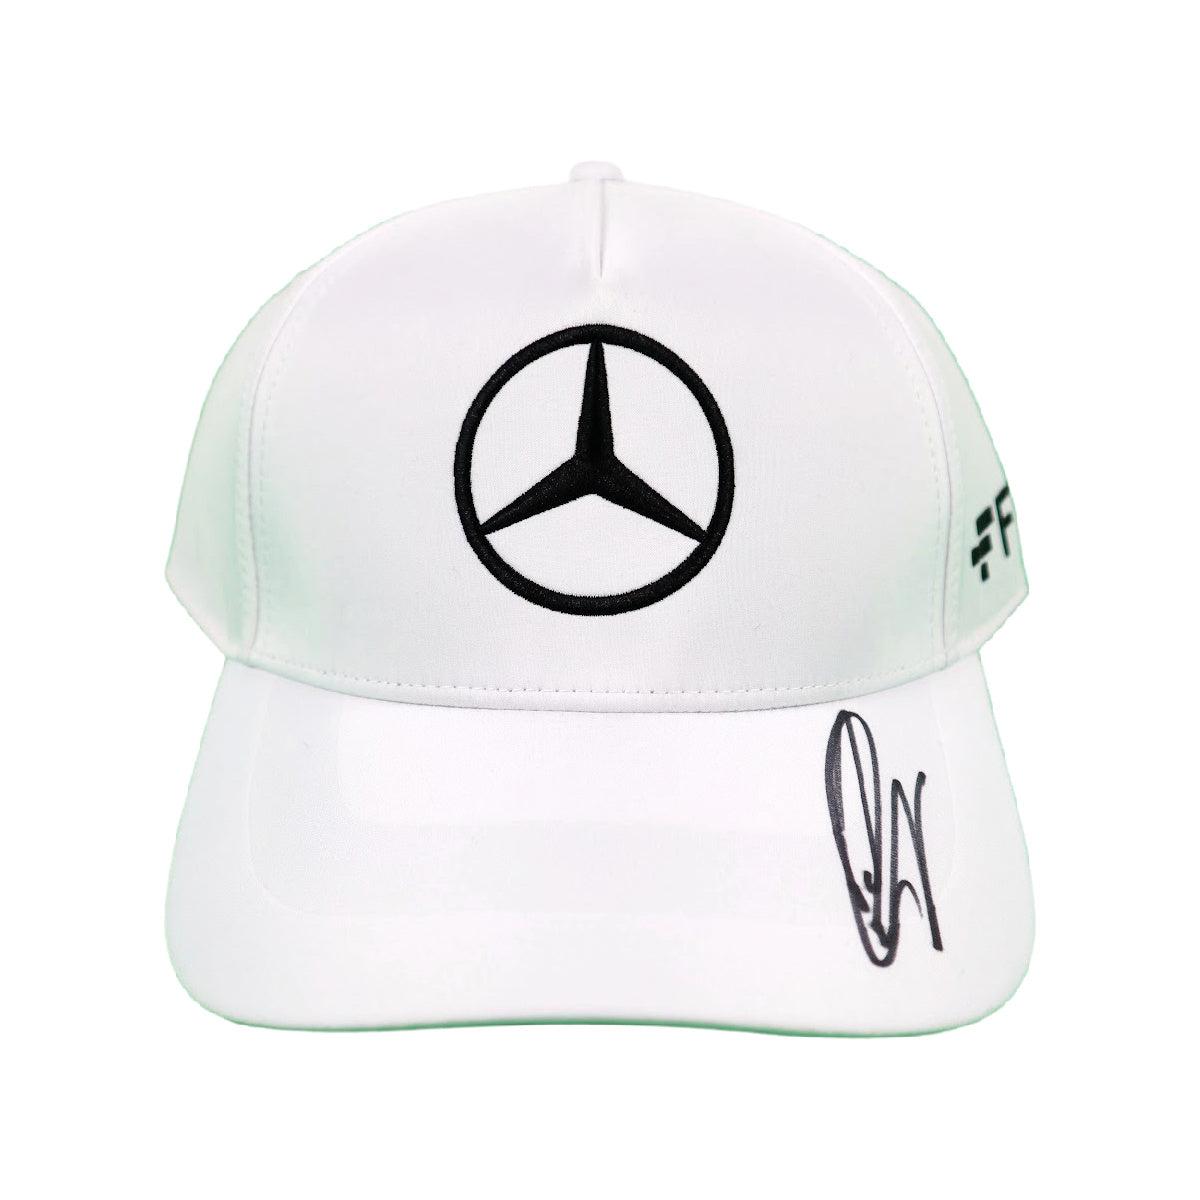 George Russell Signed Mercedes F1 Hat Autographed JSA COA